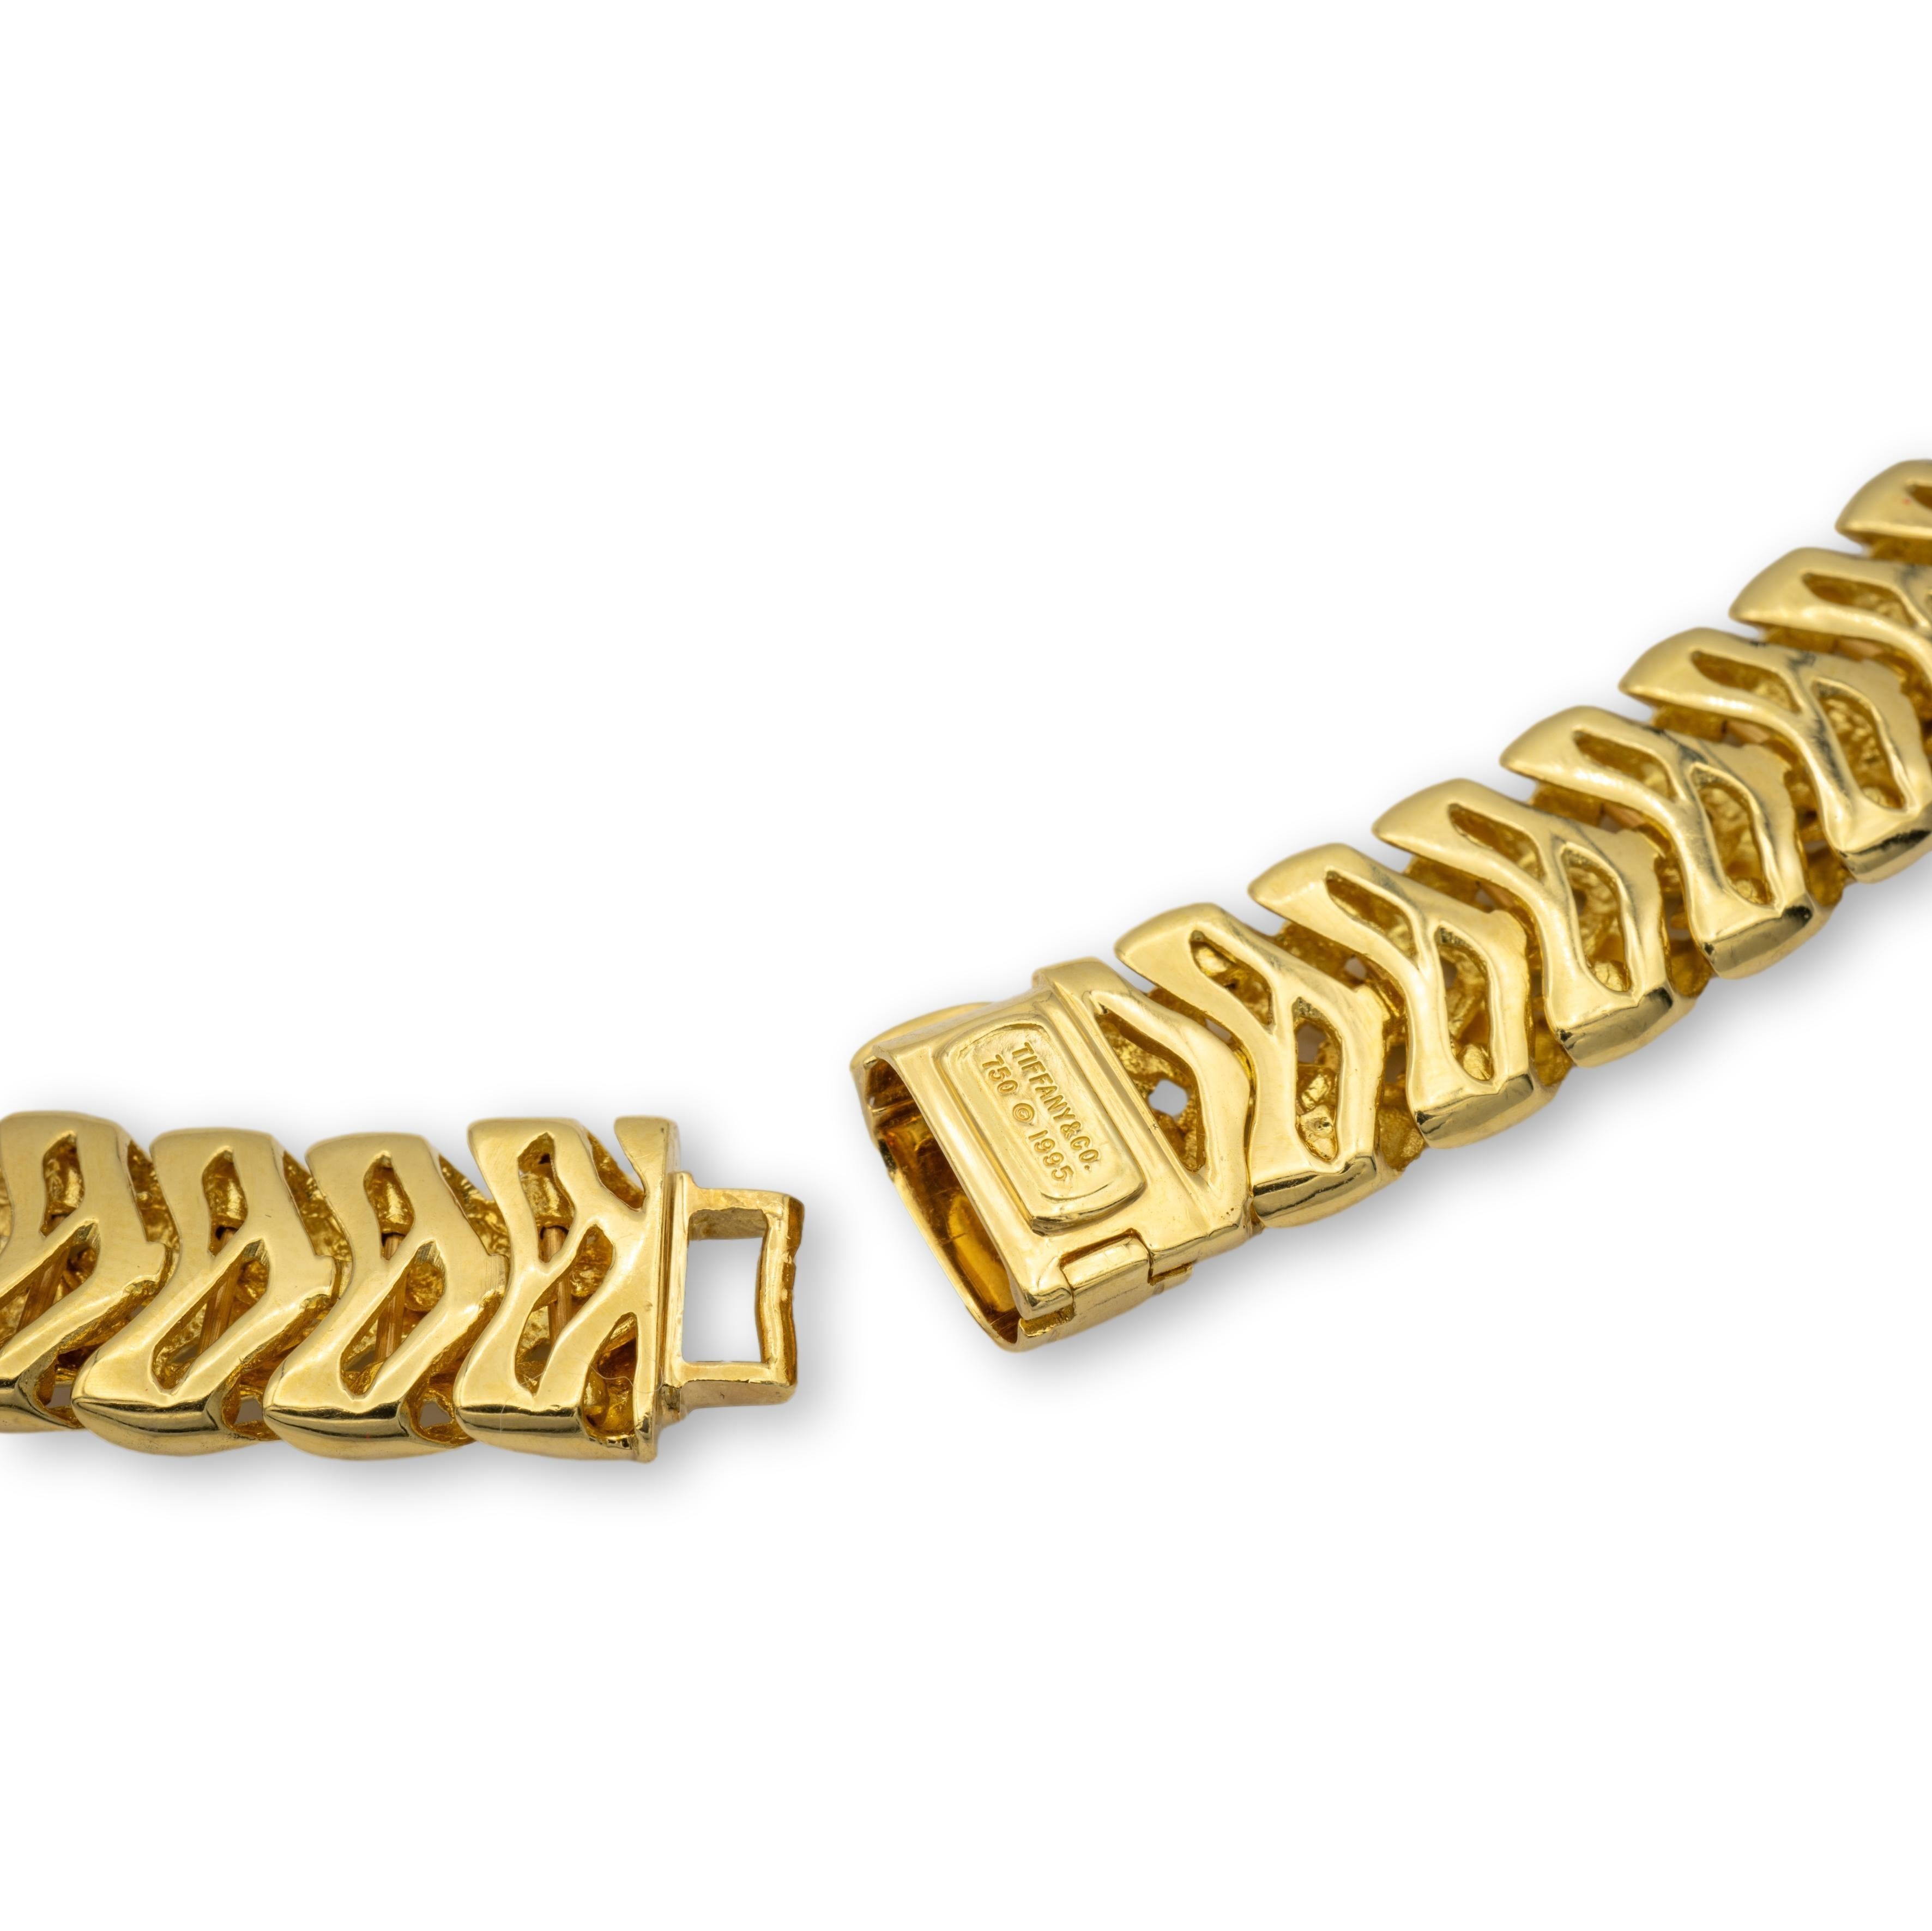 Tiffany & Co. Vintage choker necklace from the Vannerie collection finely crafted in 18 Karat yellow gold in a basket weave design with a large folding snap and hook closure mechanism. The necklace weighs an impressive 121.9 grams and was custom